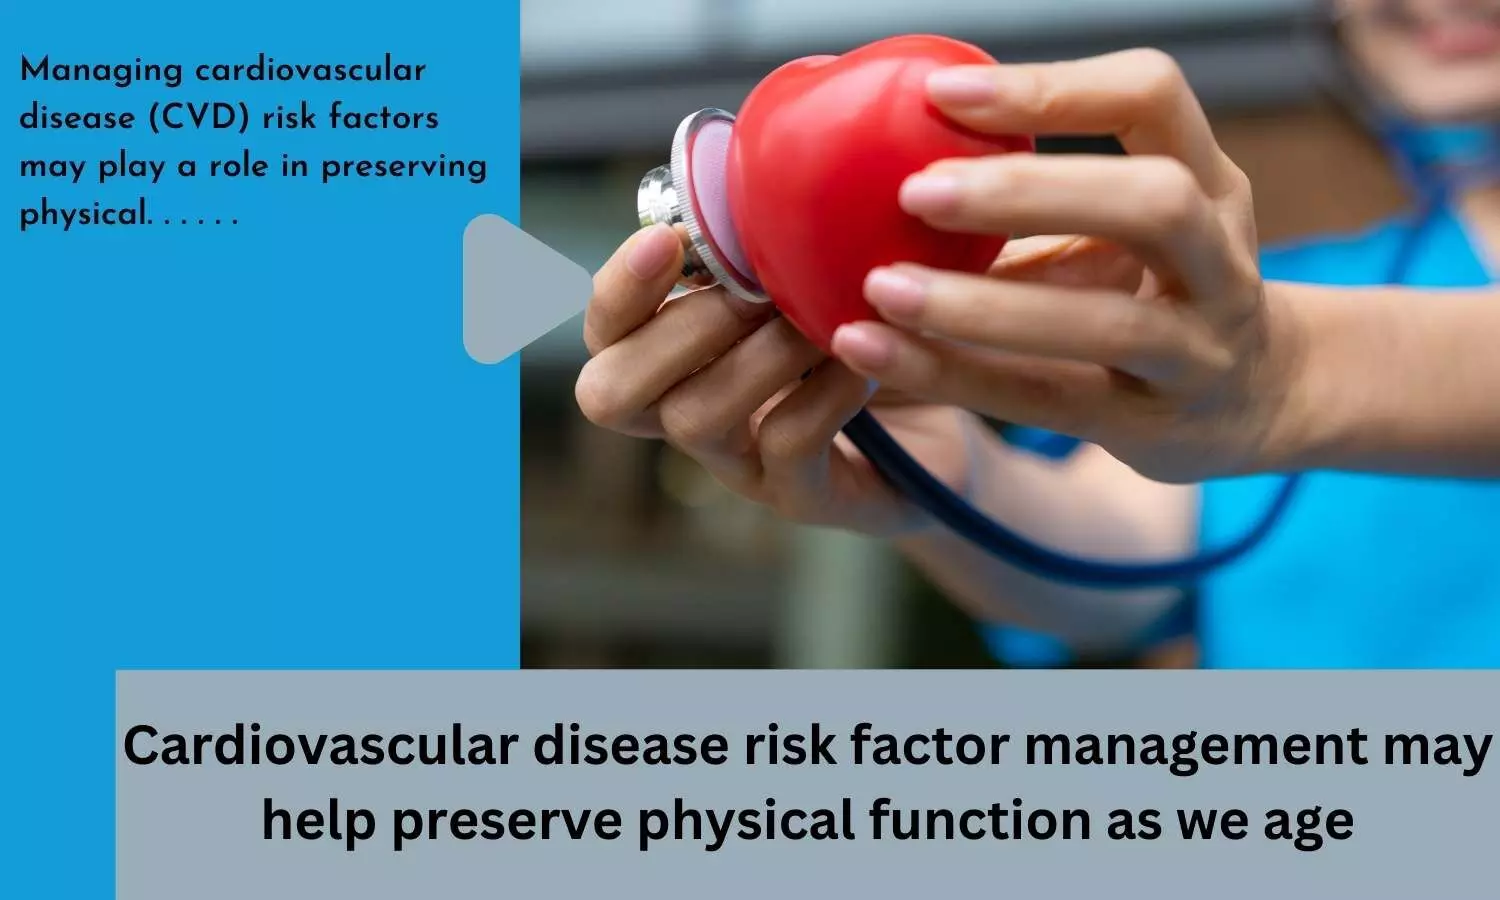 Cardiovascular disease risk factor management may help preserve physical function as we age